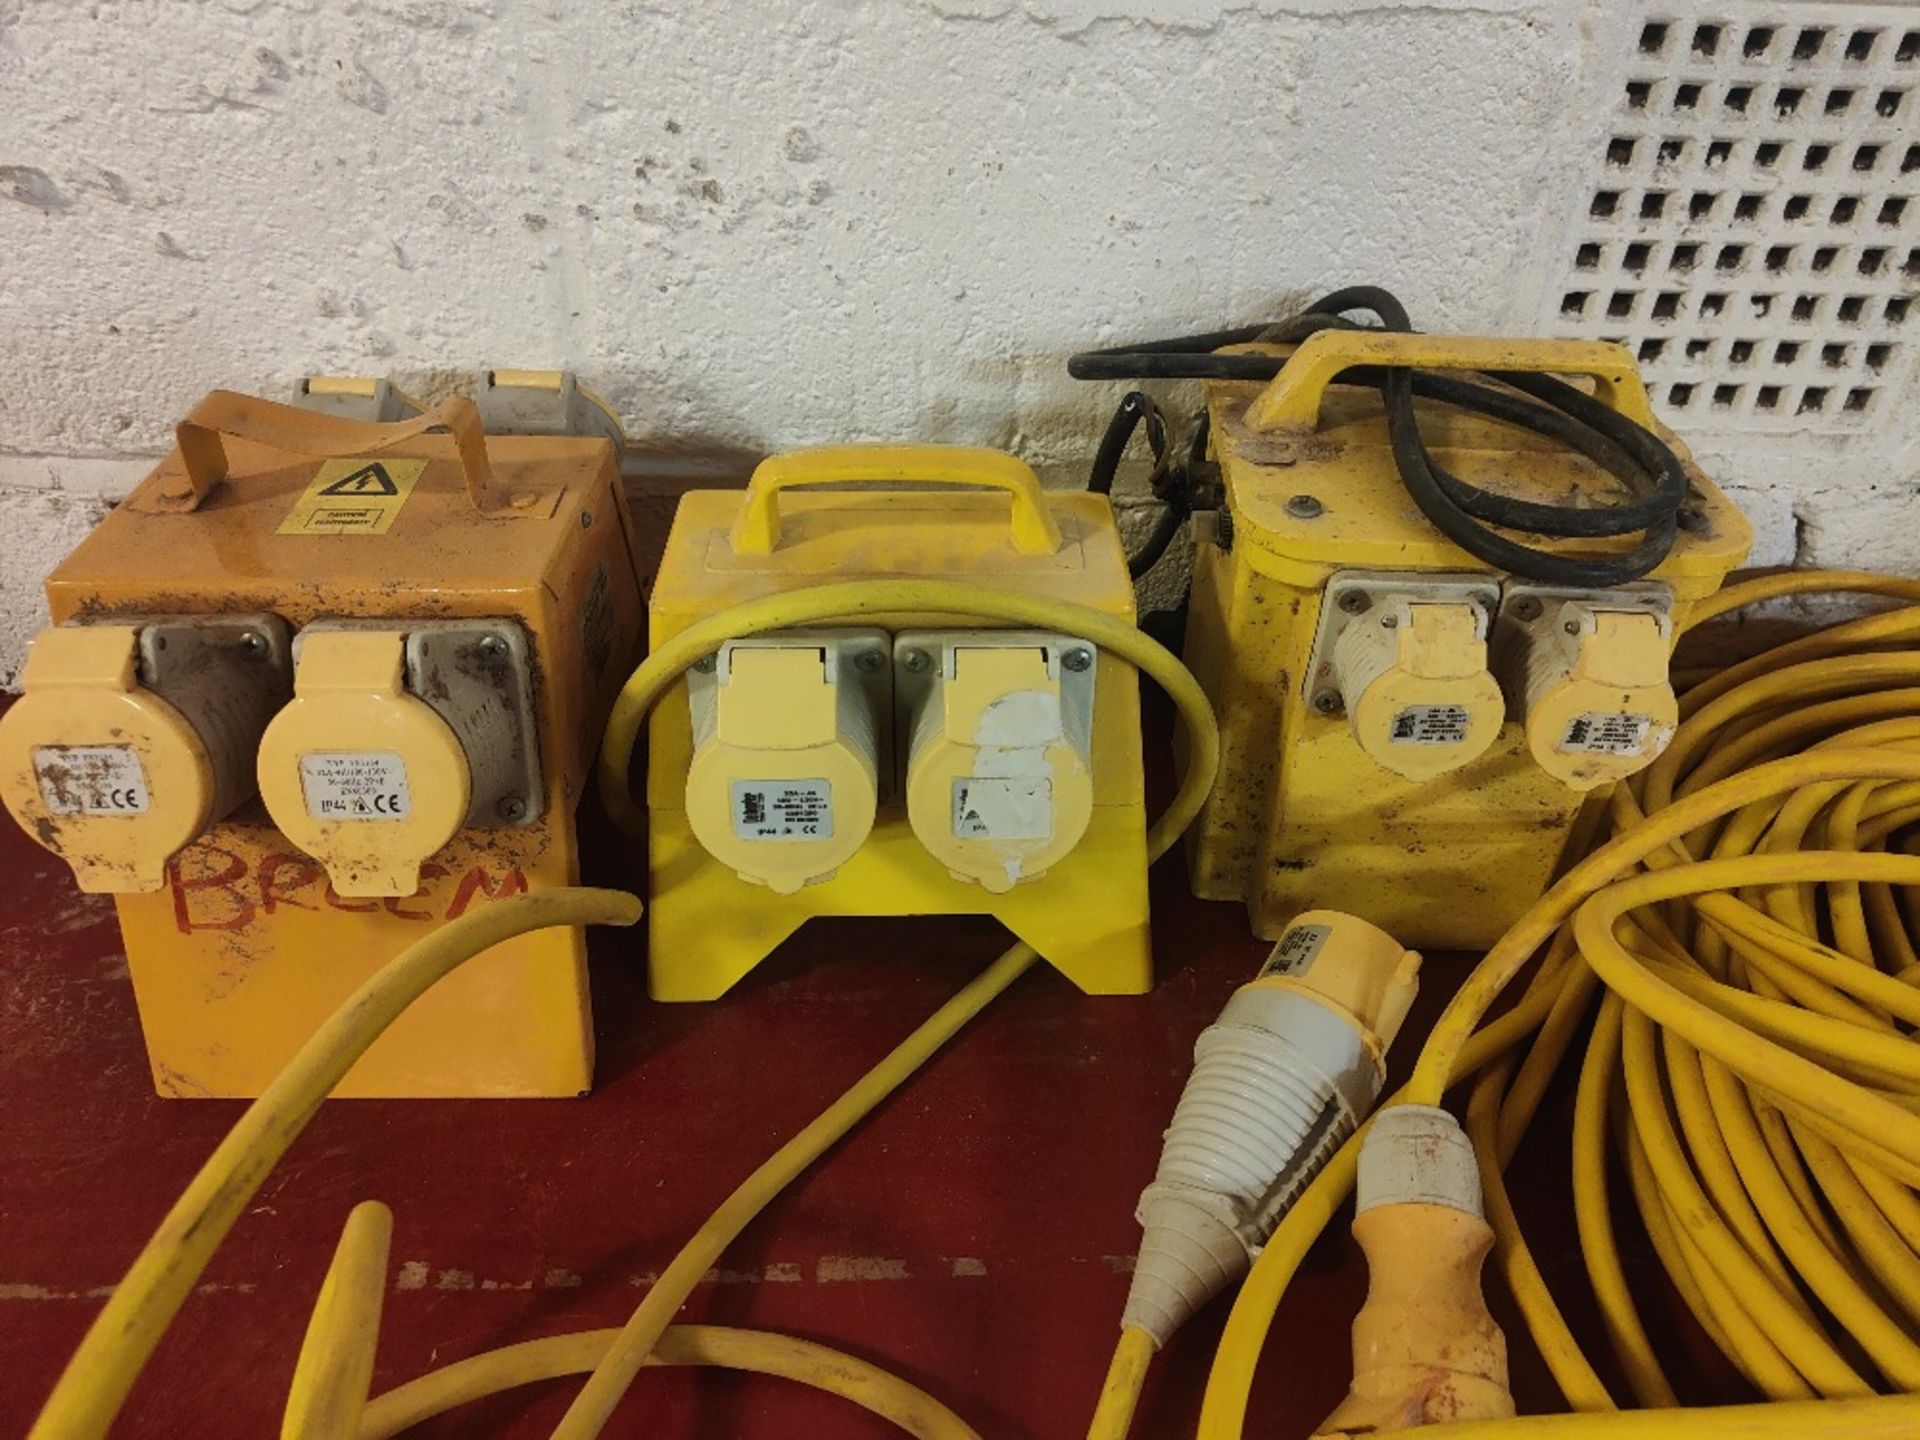 Quantity of 110V Electrical Cables and Splitters - Image 3 of 5